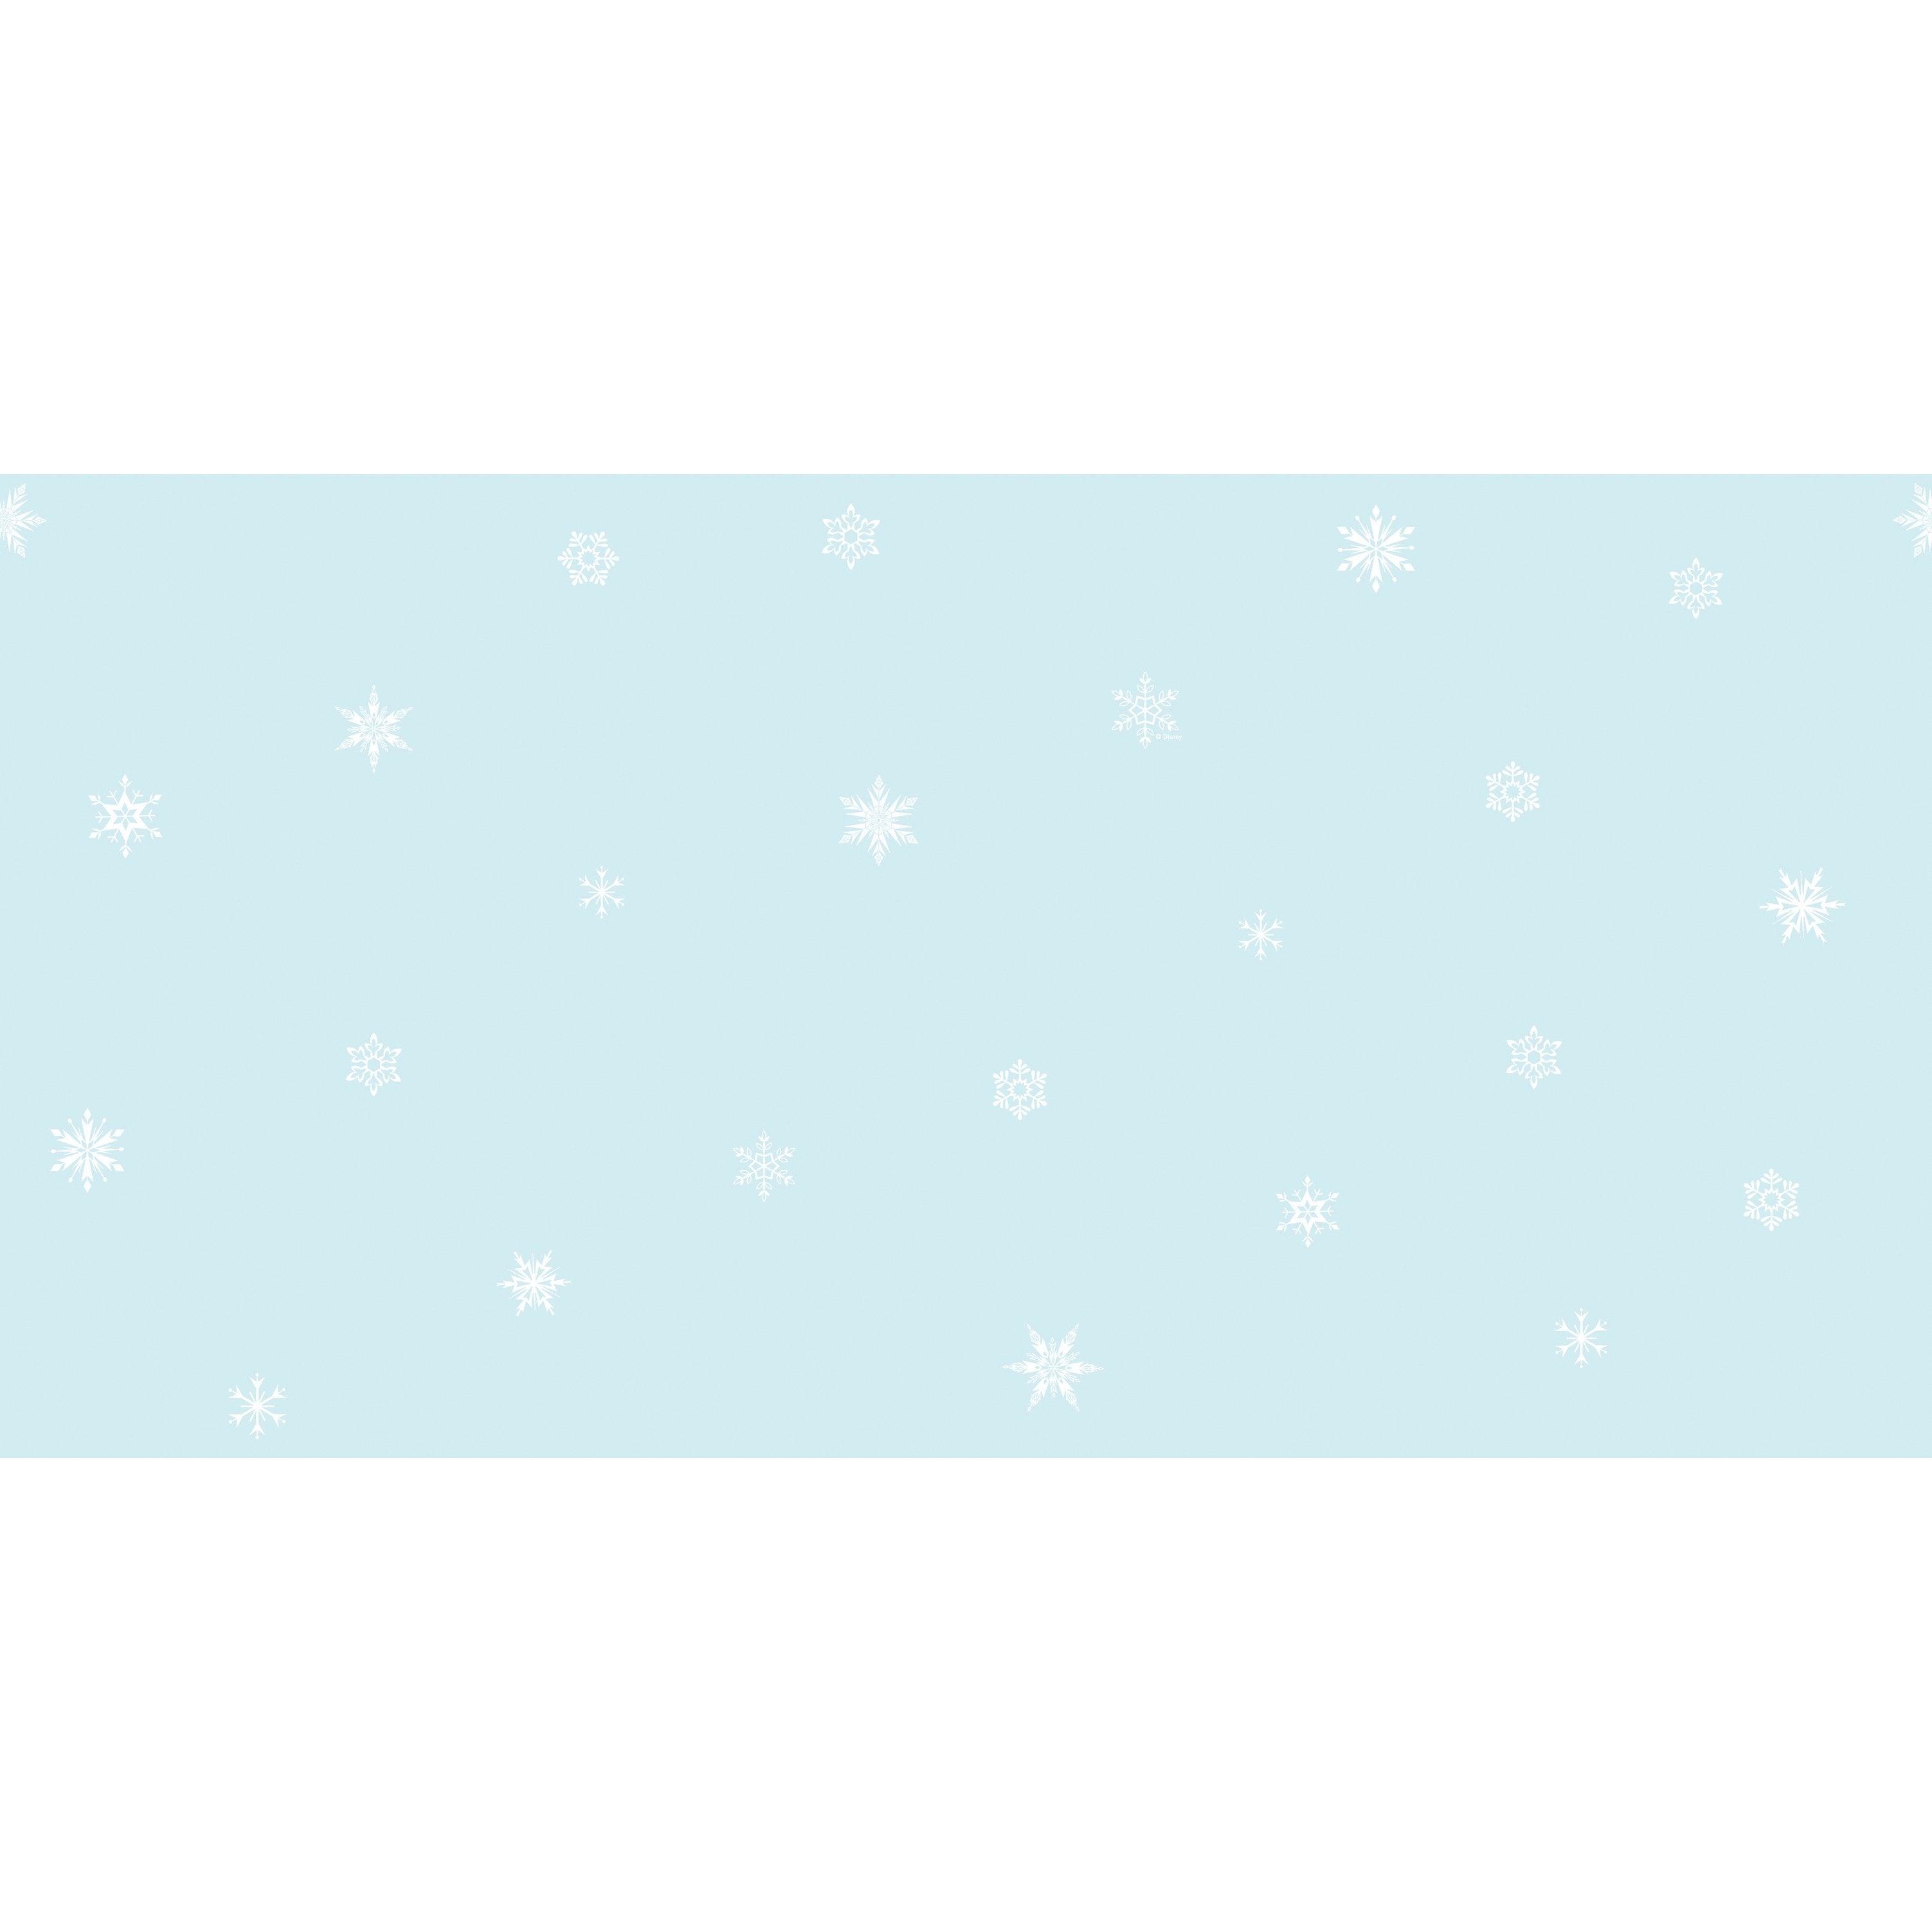 Olaf's World (or Snow Flakes) Wallpaper - Kids Haven